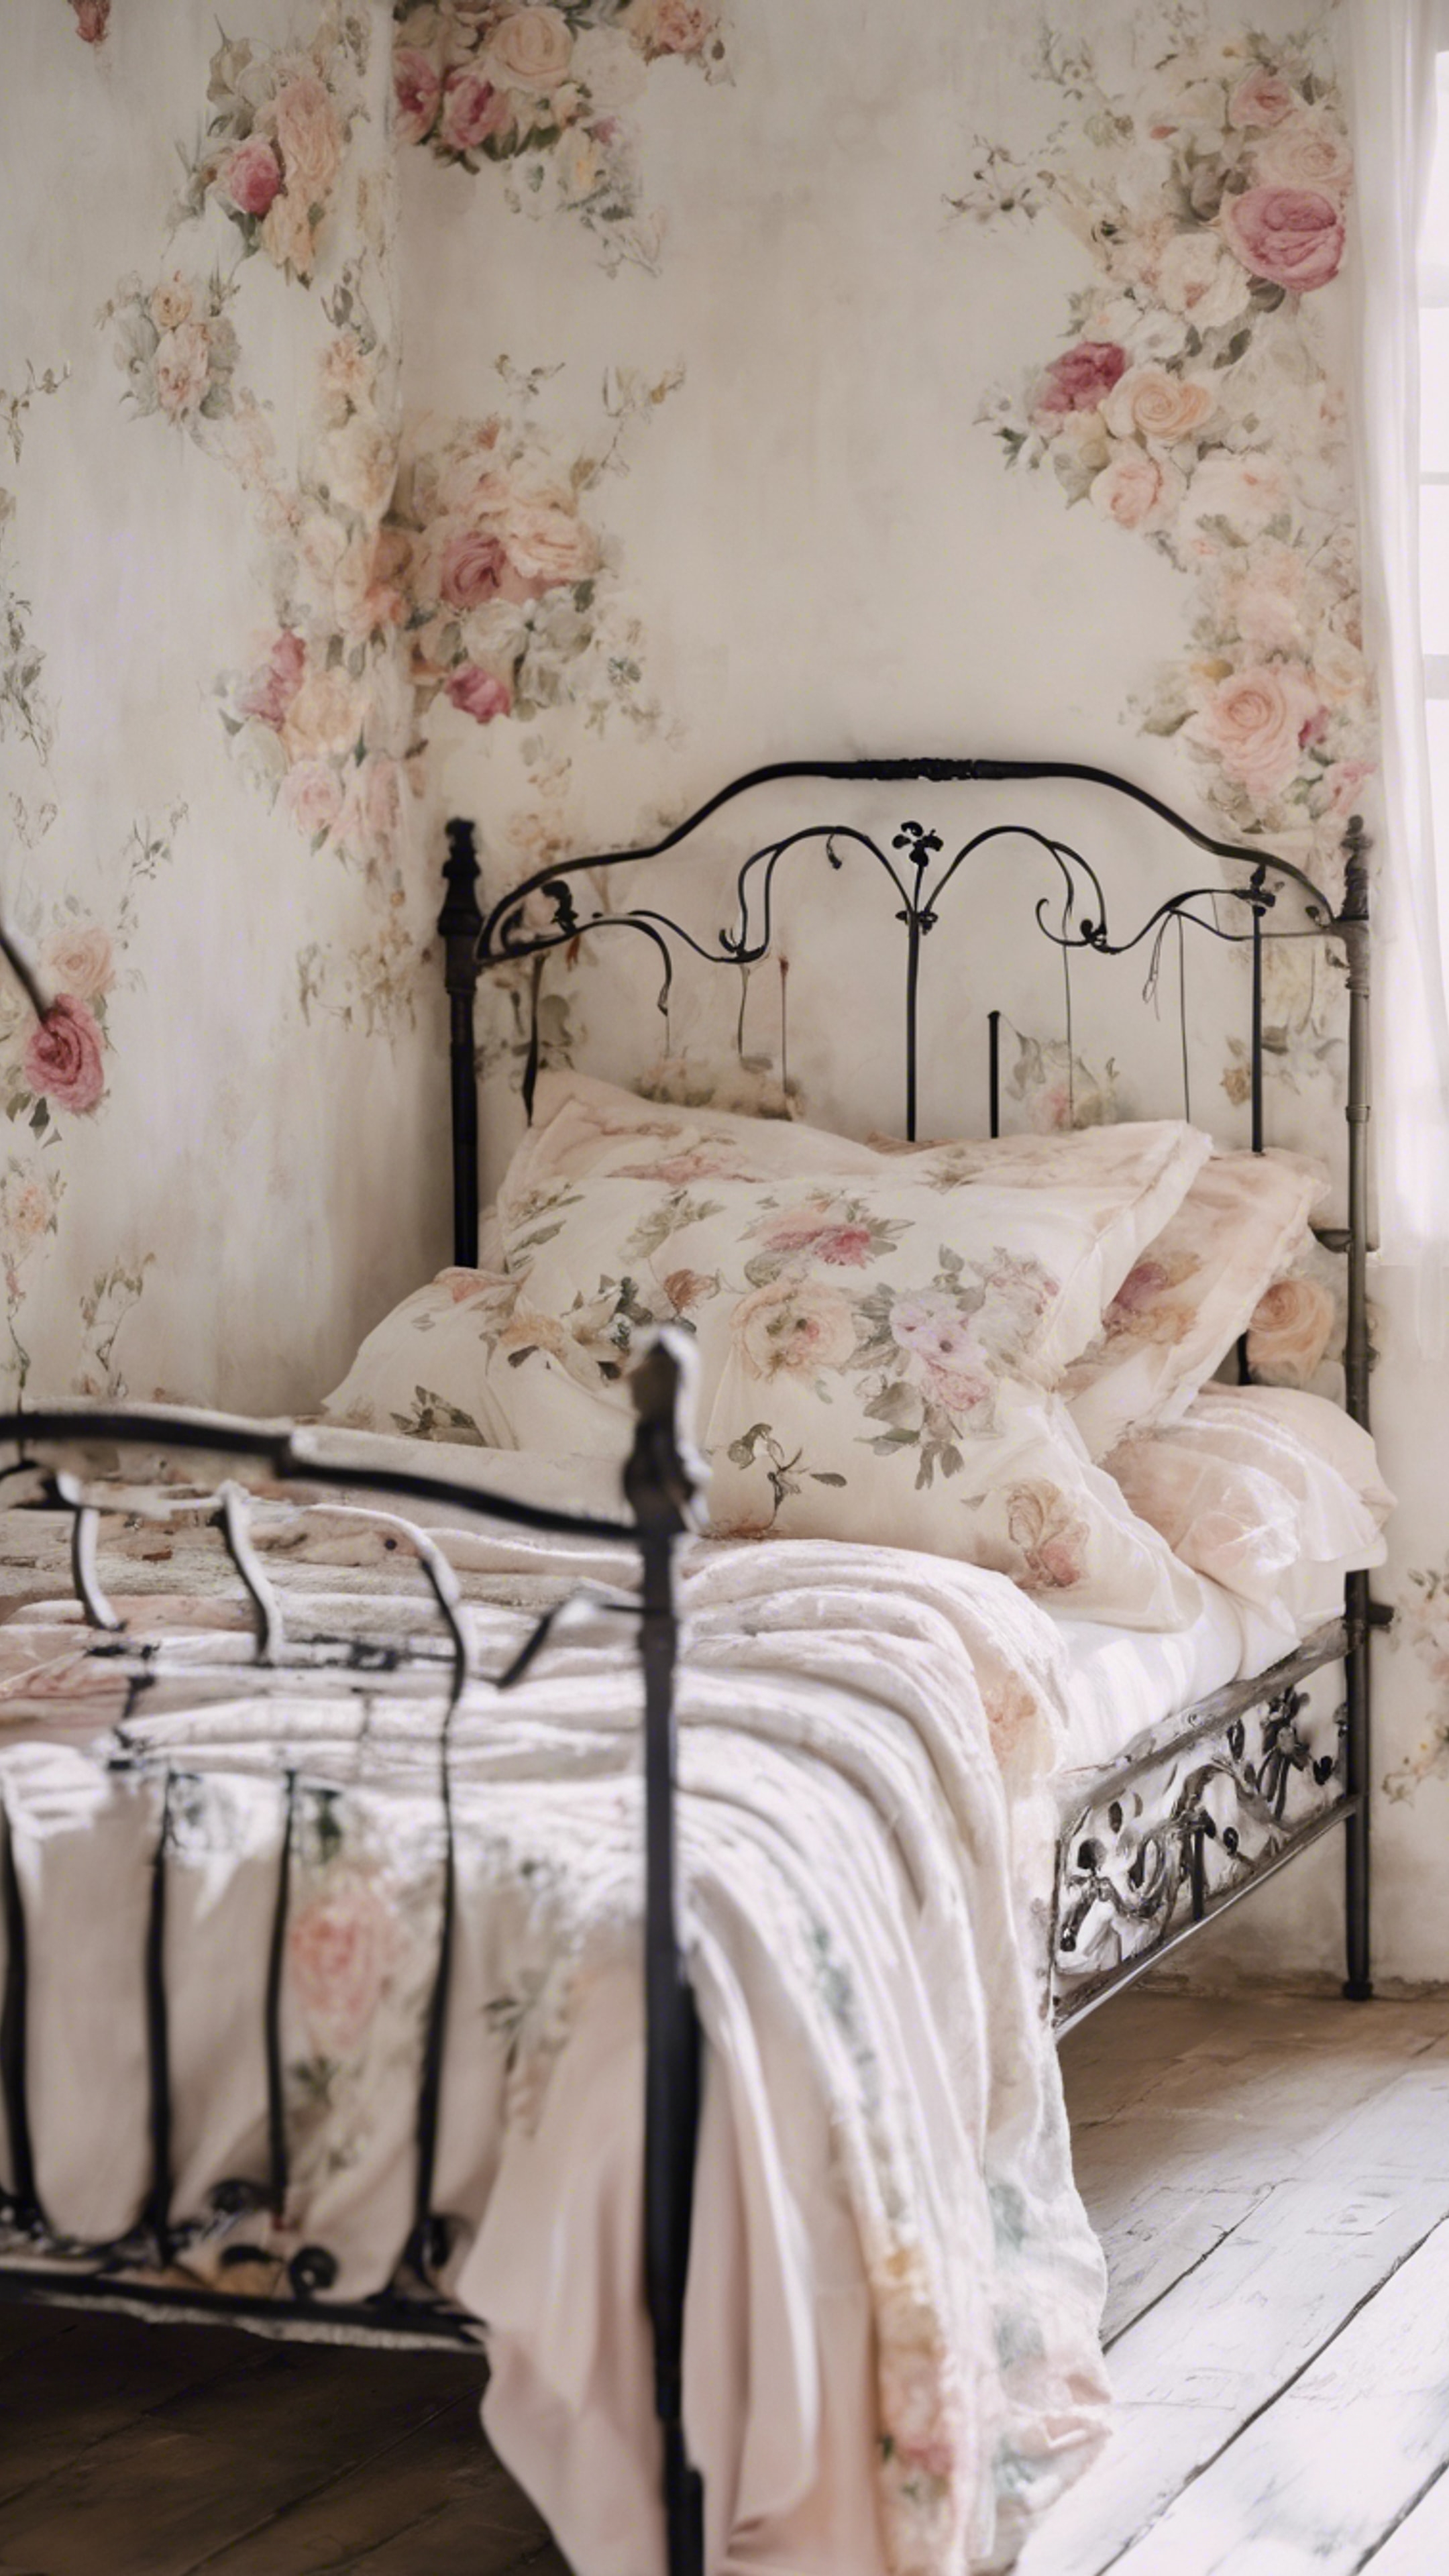 A French country bedroom featuring a wrought-iron bed and pastel floral patterns against whitewashed walls. Wallpaper[80b94b8799dc4ca6abc7]